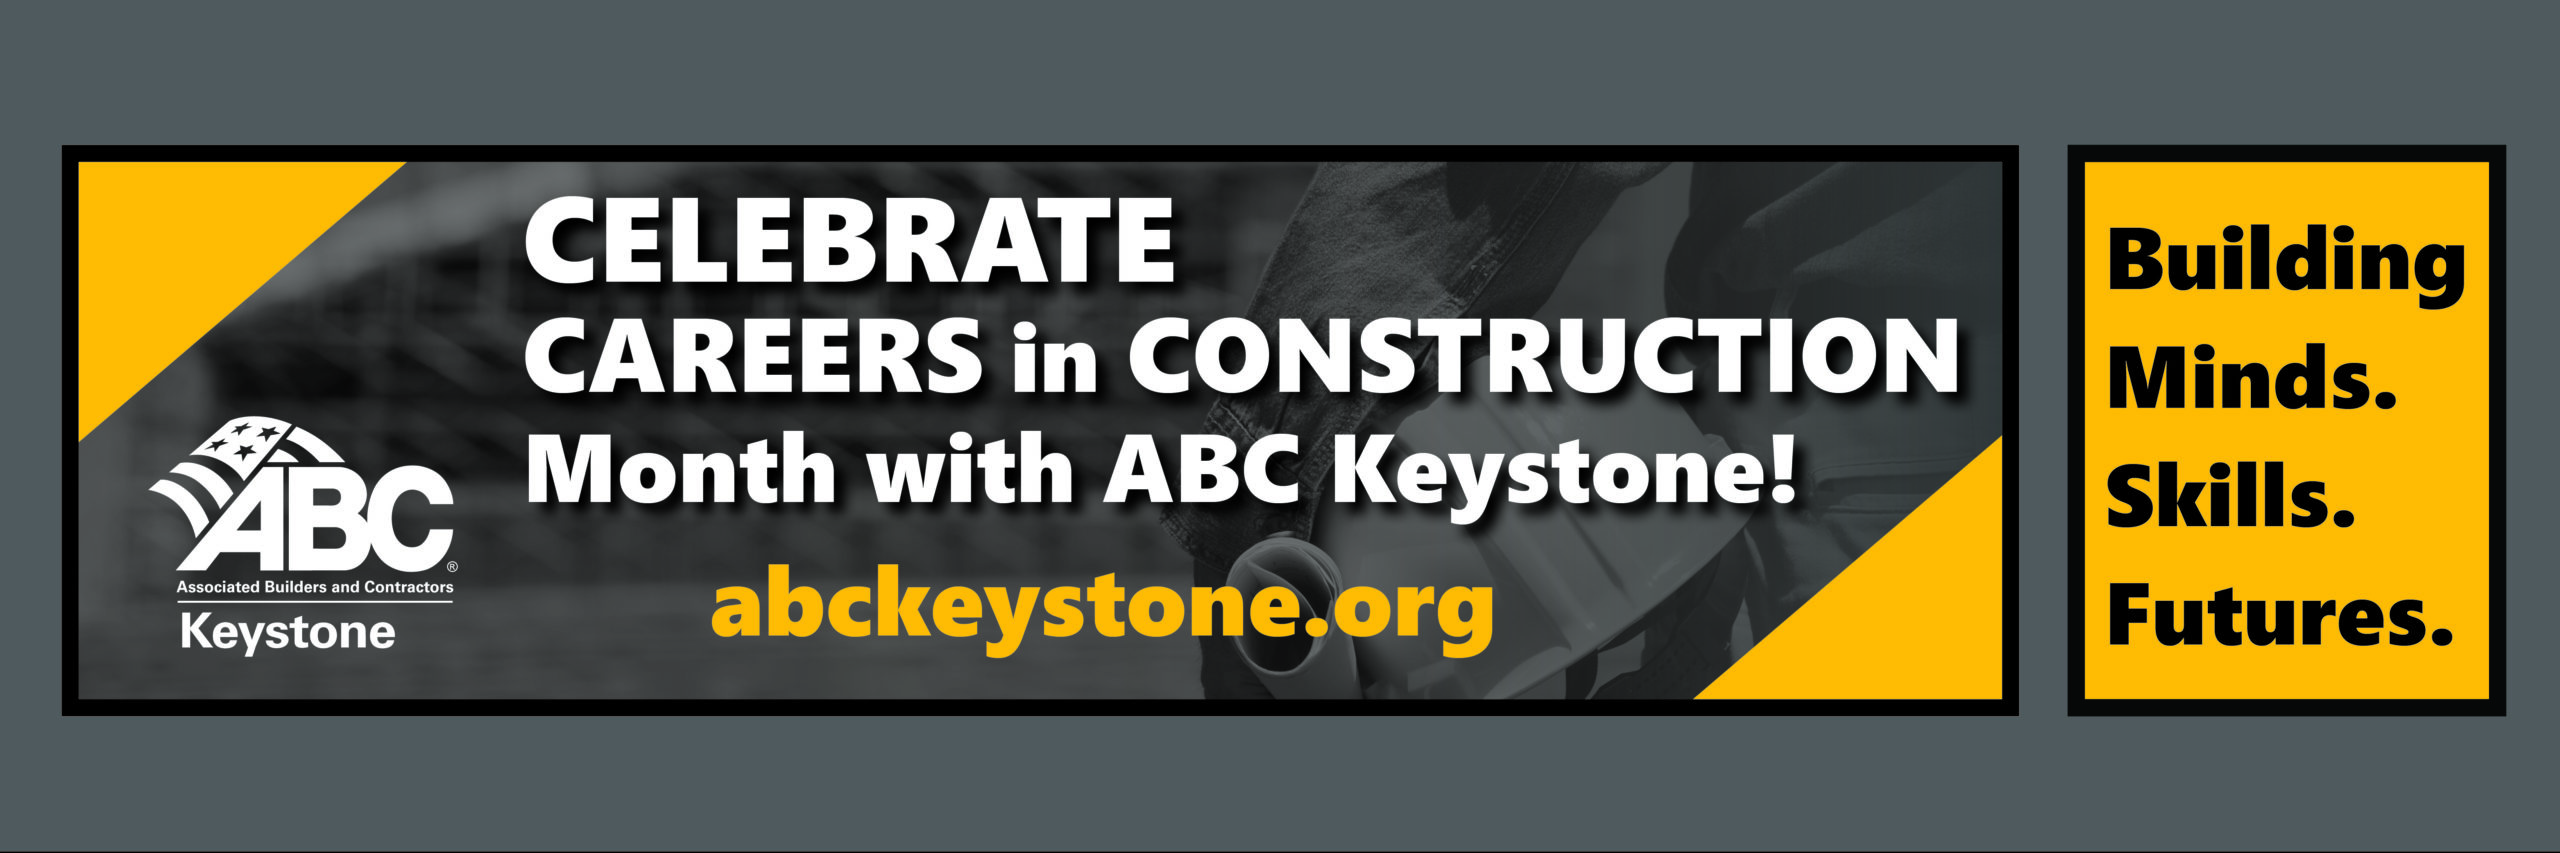 Careers in Construction Month at ABC Keystone